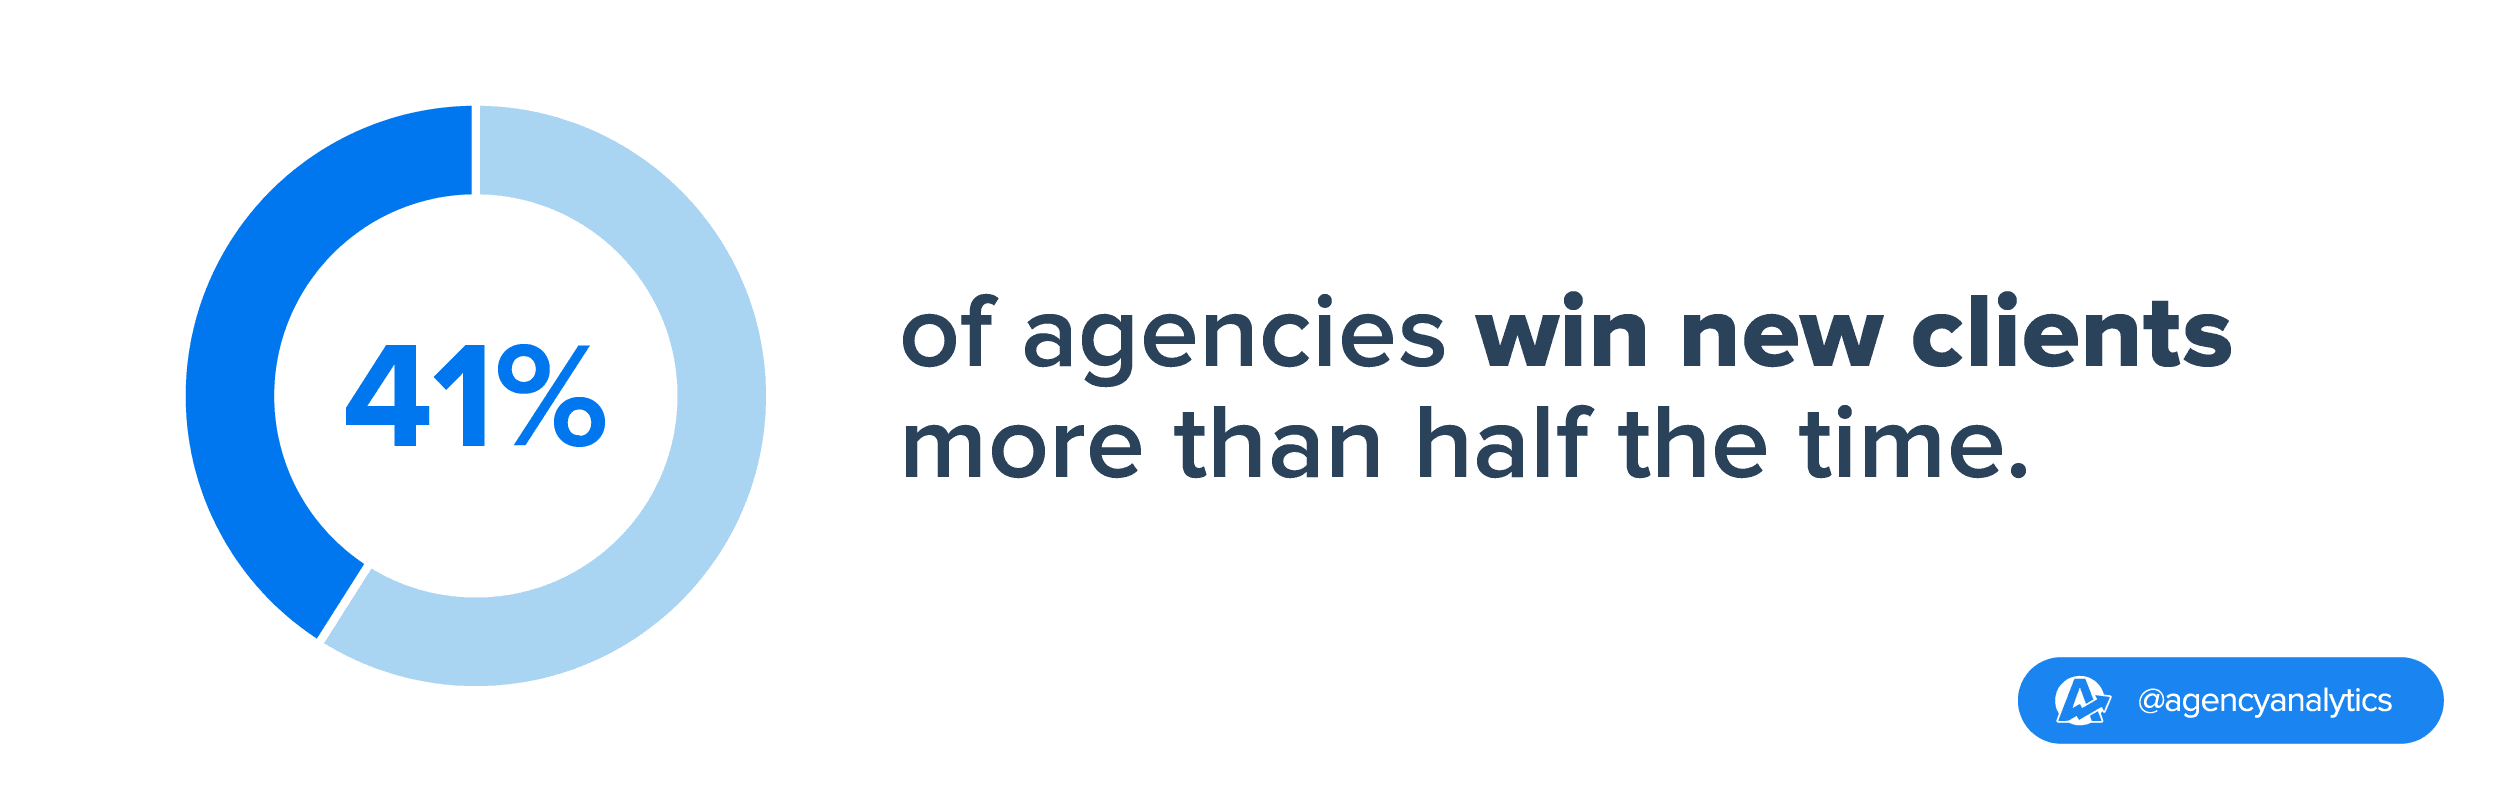 41% of agencies win sales pitches more than half the time